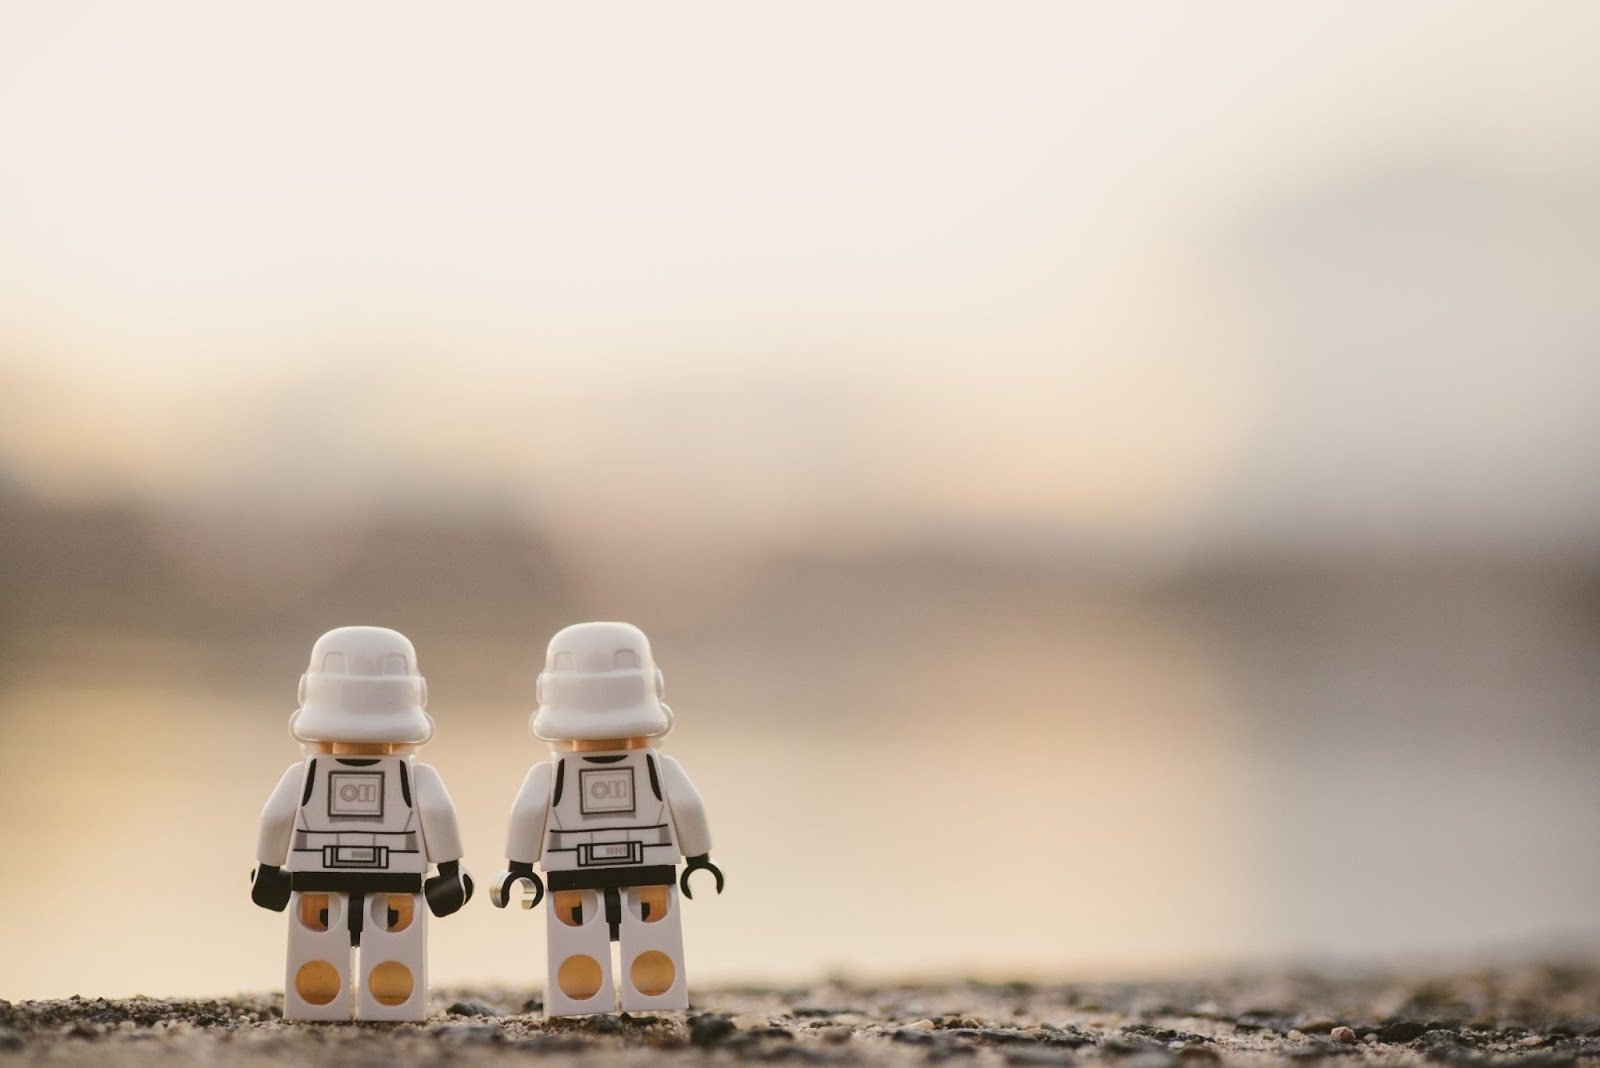 Two Lego figures facing away from the camera.